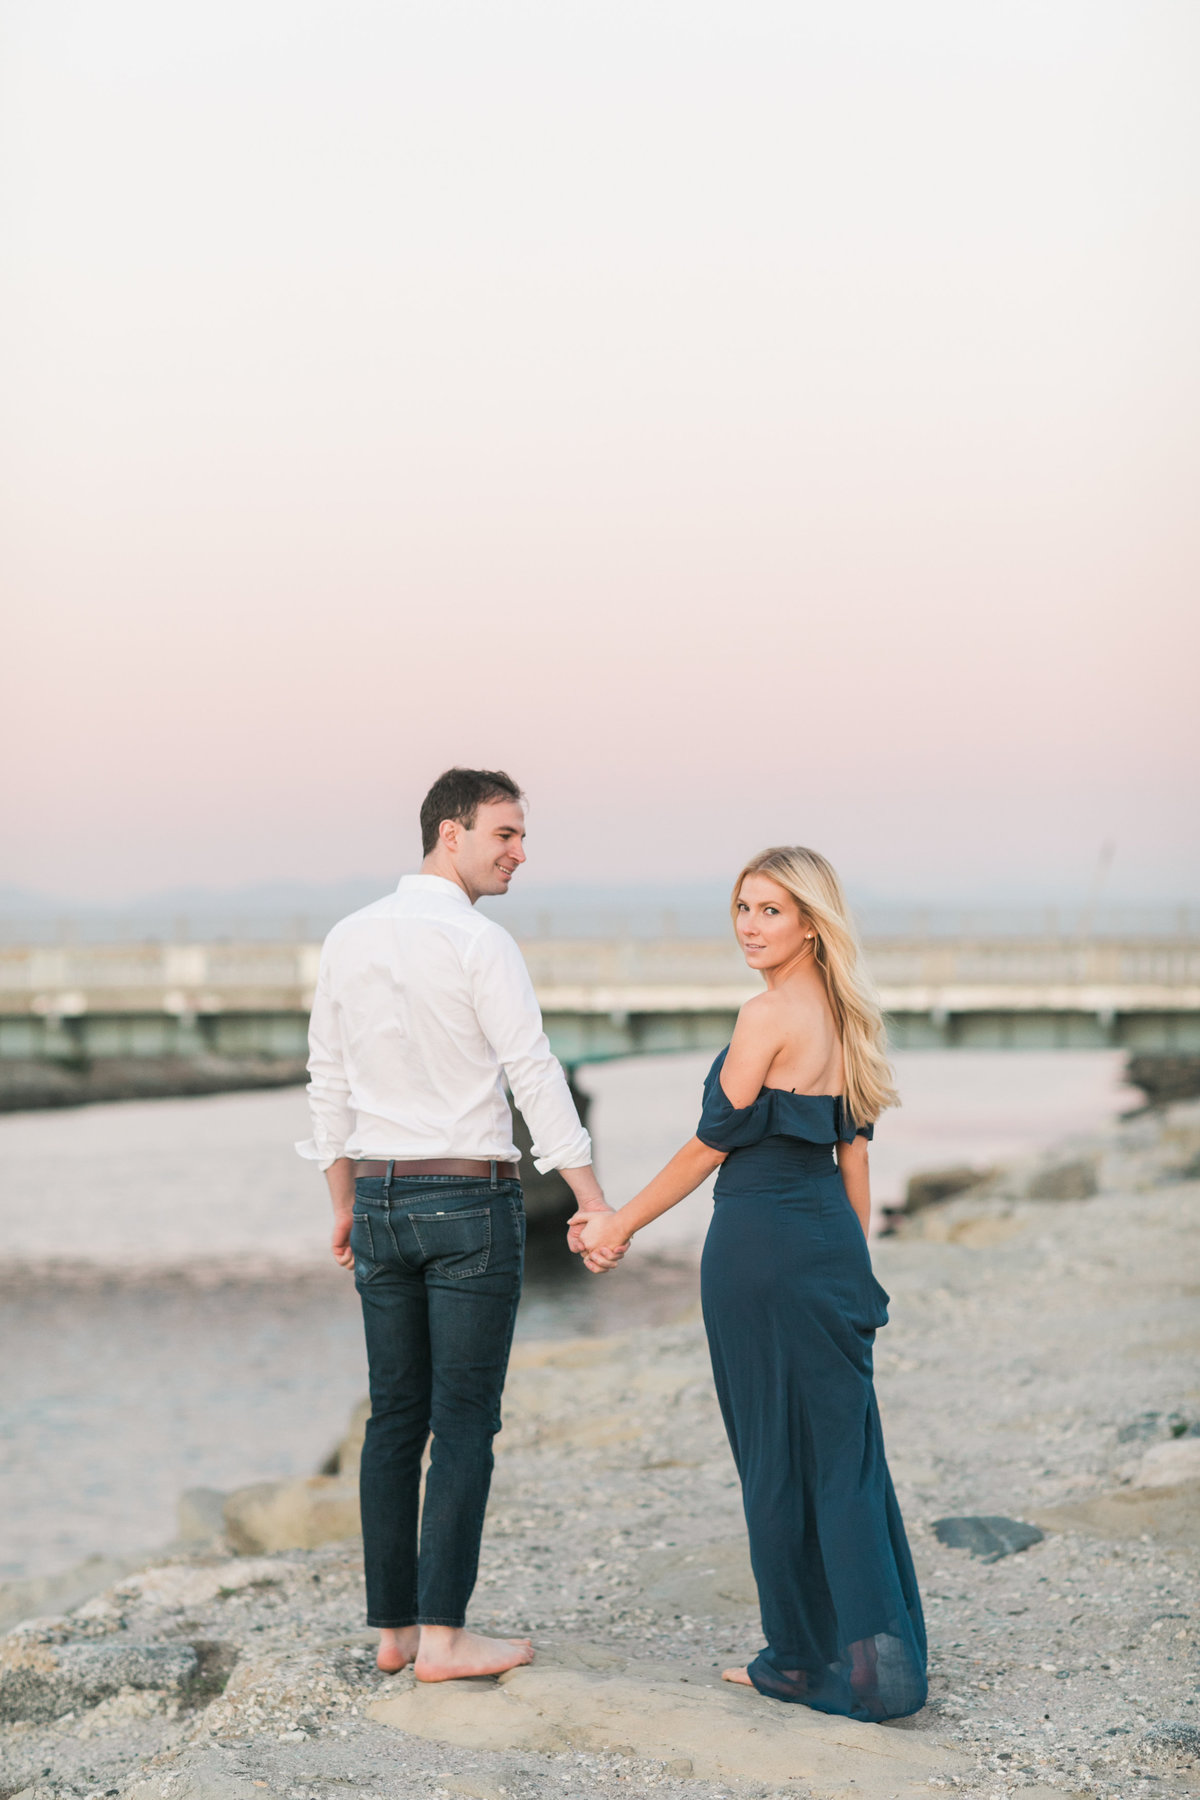 Venice Canal Beach Engagement Session_Valorie Darling Photography-7086